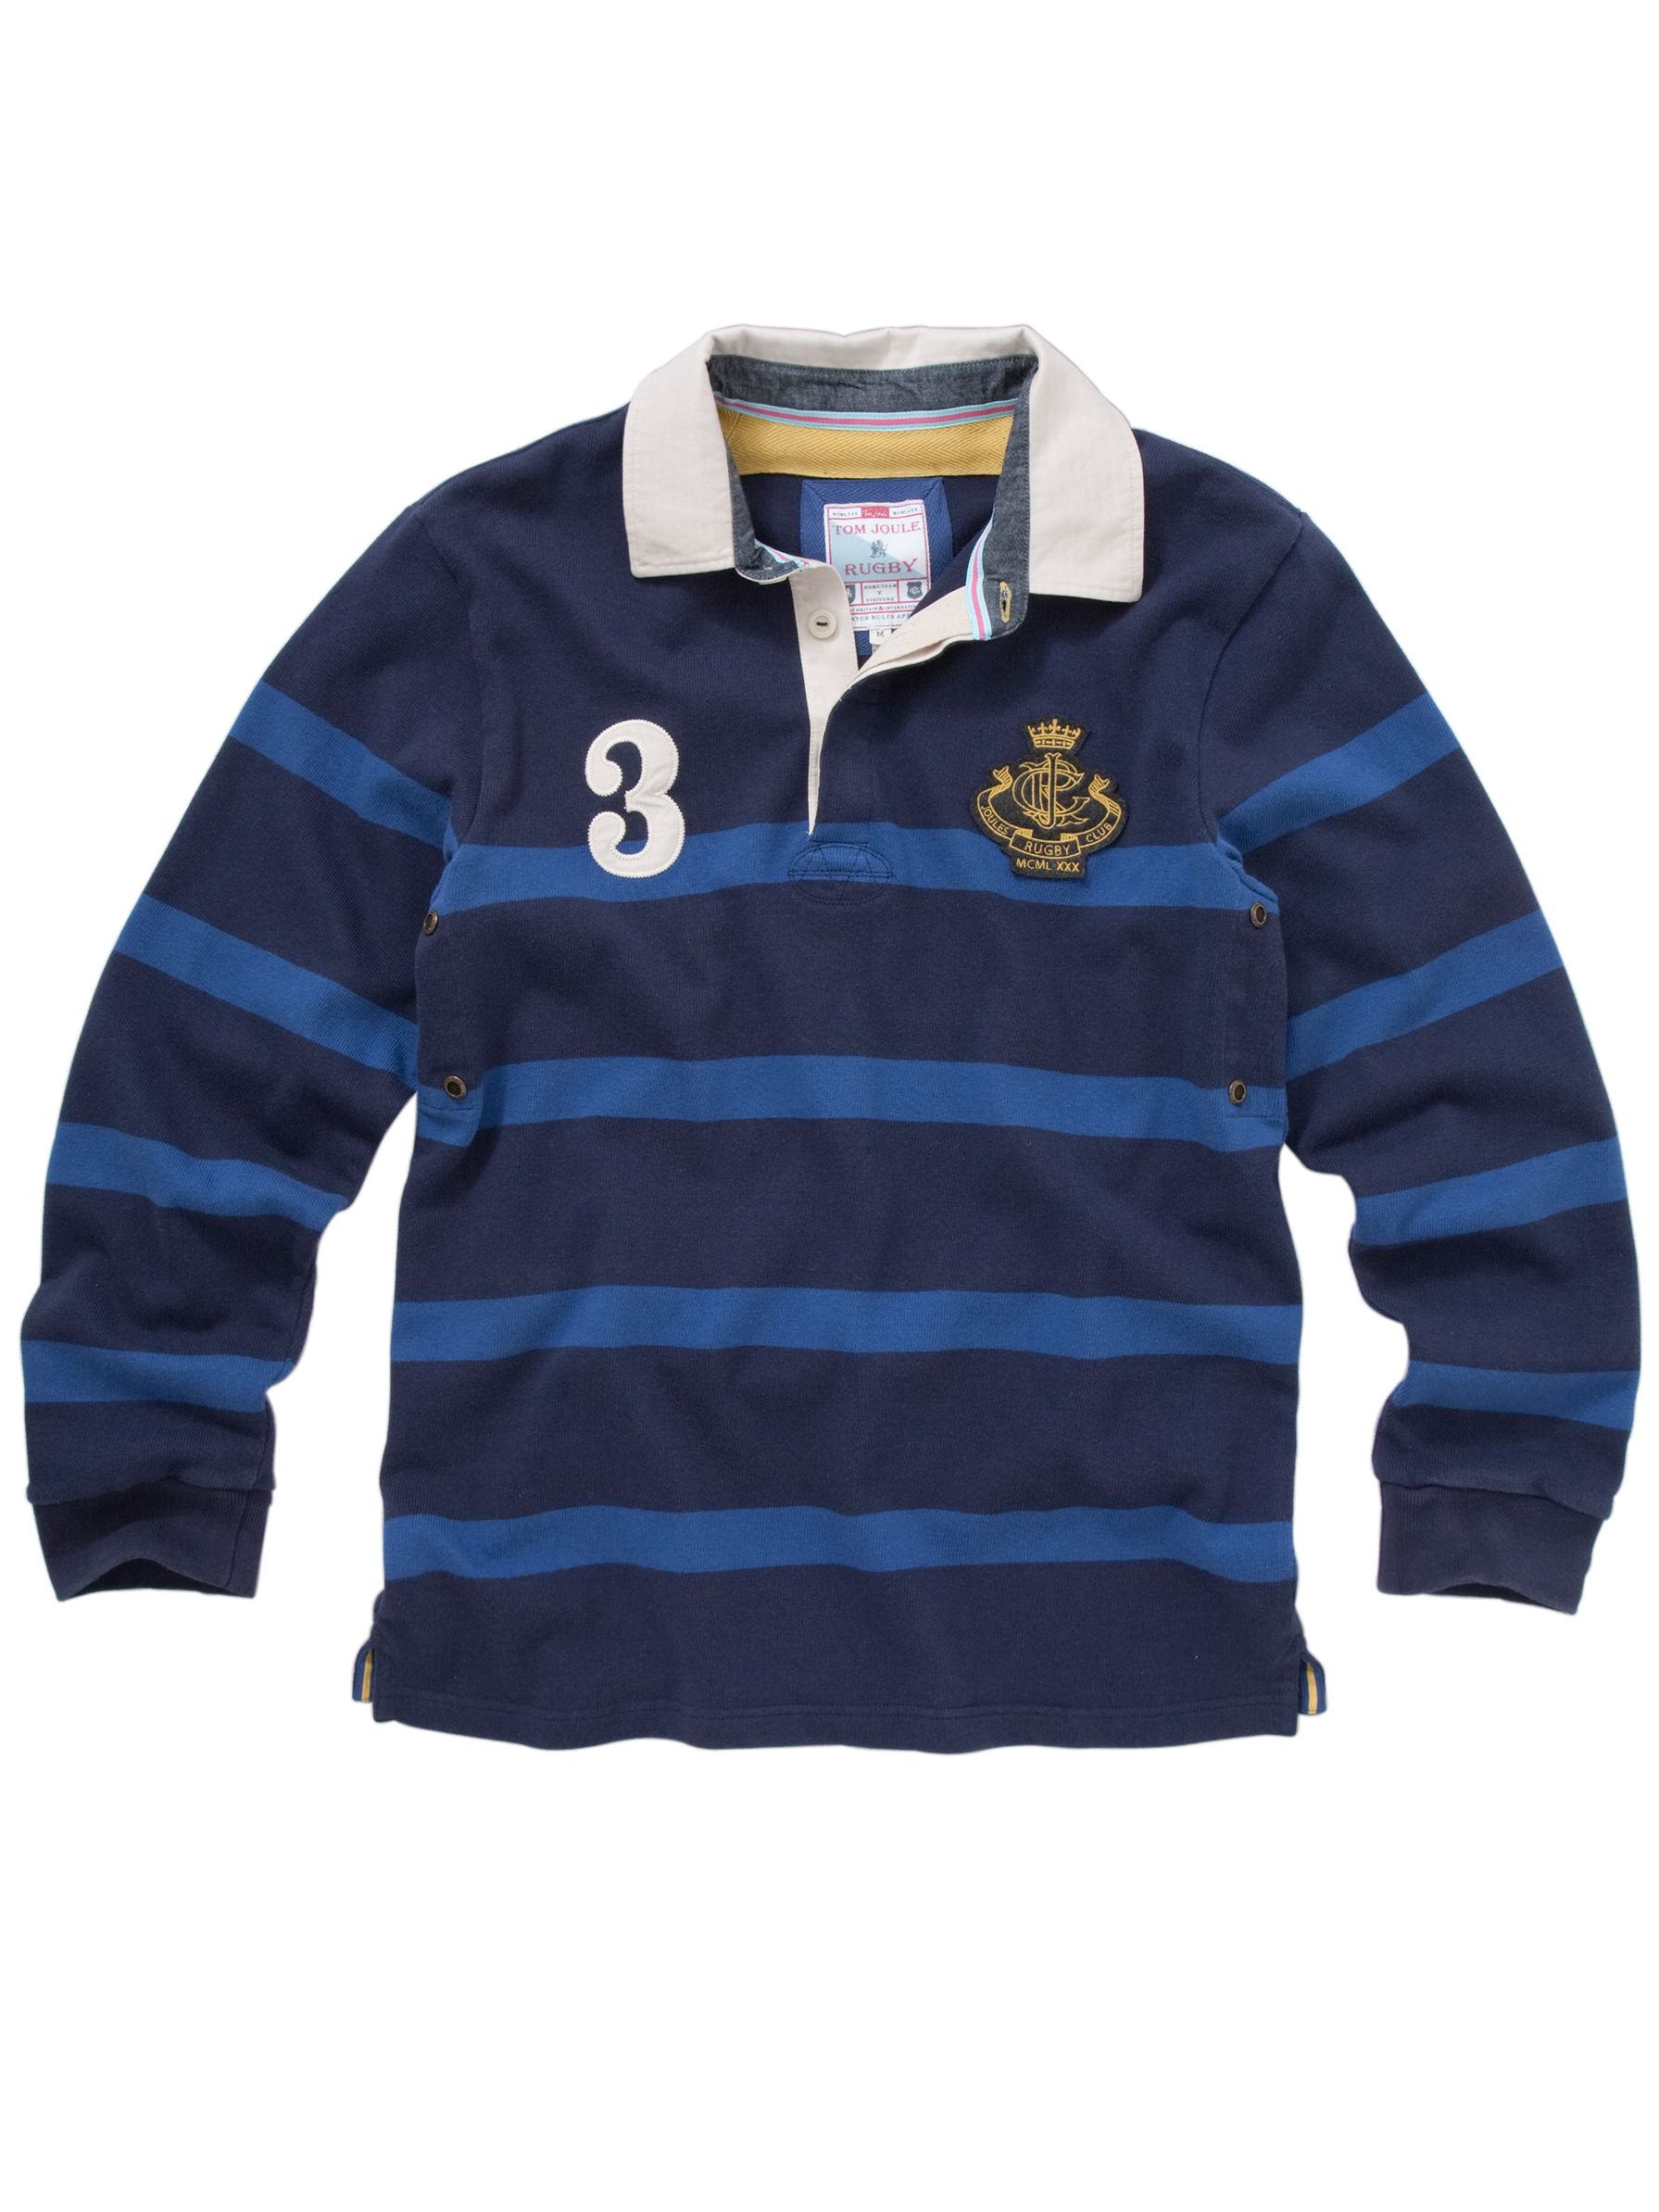 Joules Stamford Stripe Rugby Shirt, Aux Blue